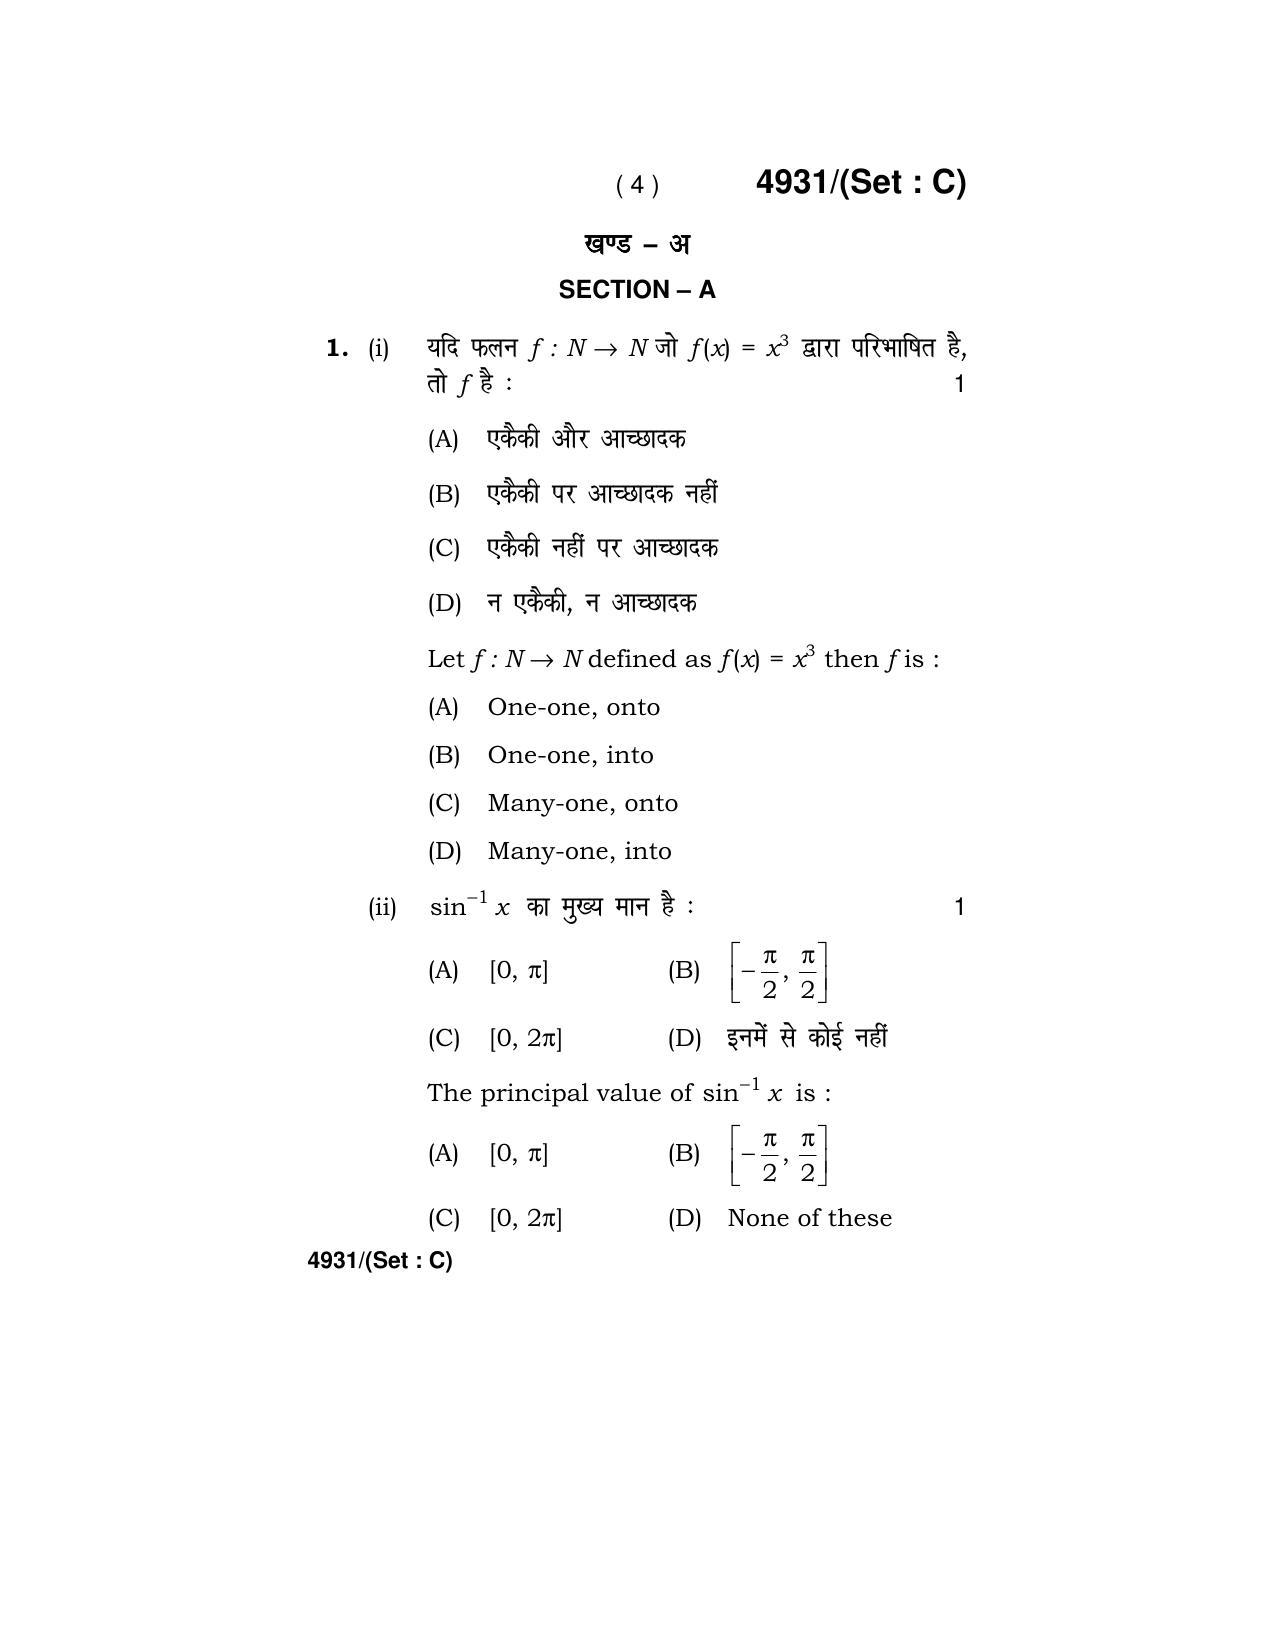 Haryana Board HBSE Class 12 Mathematics 2020 Question Paper - Page 36